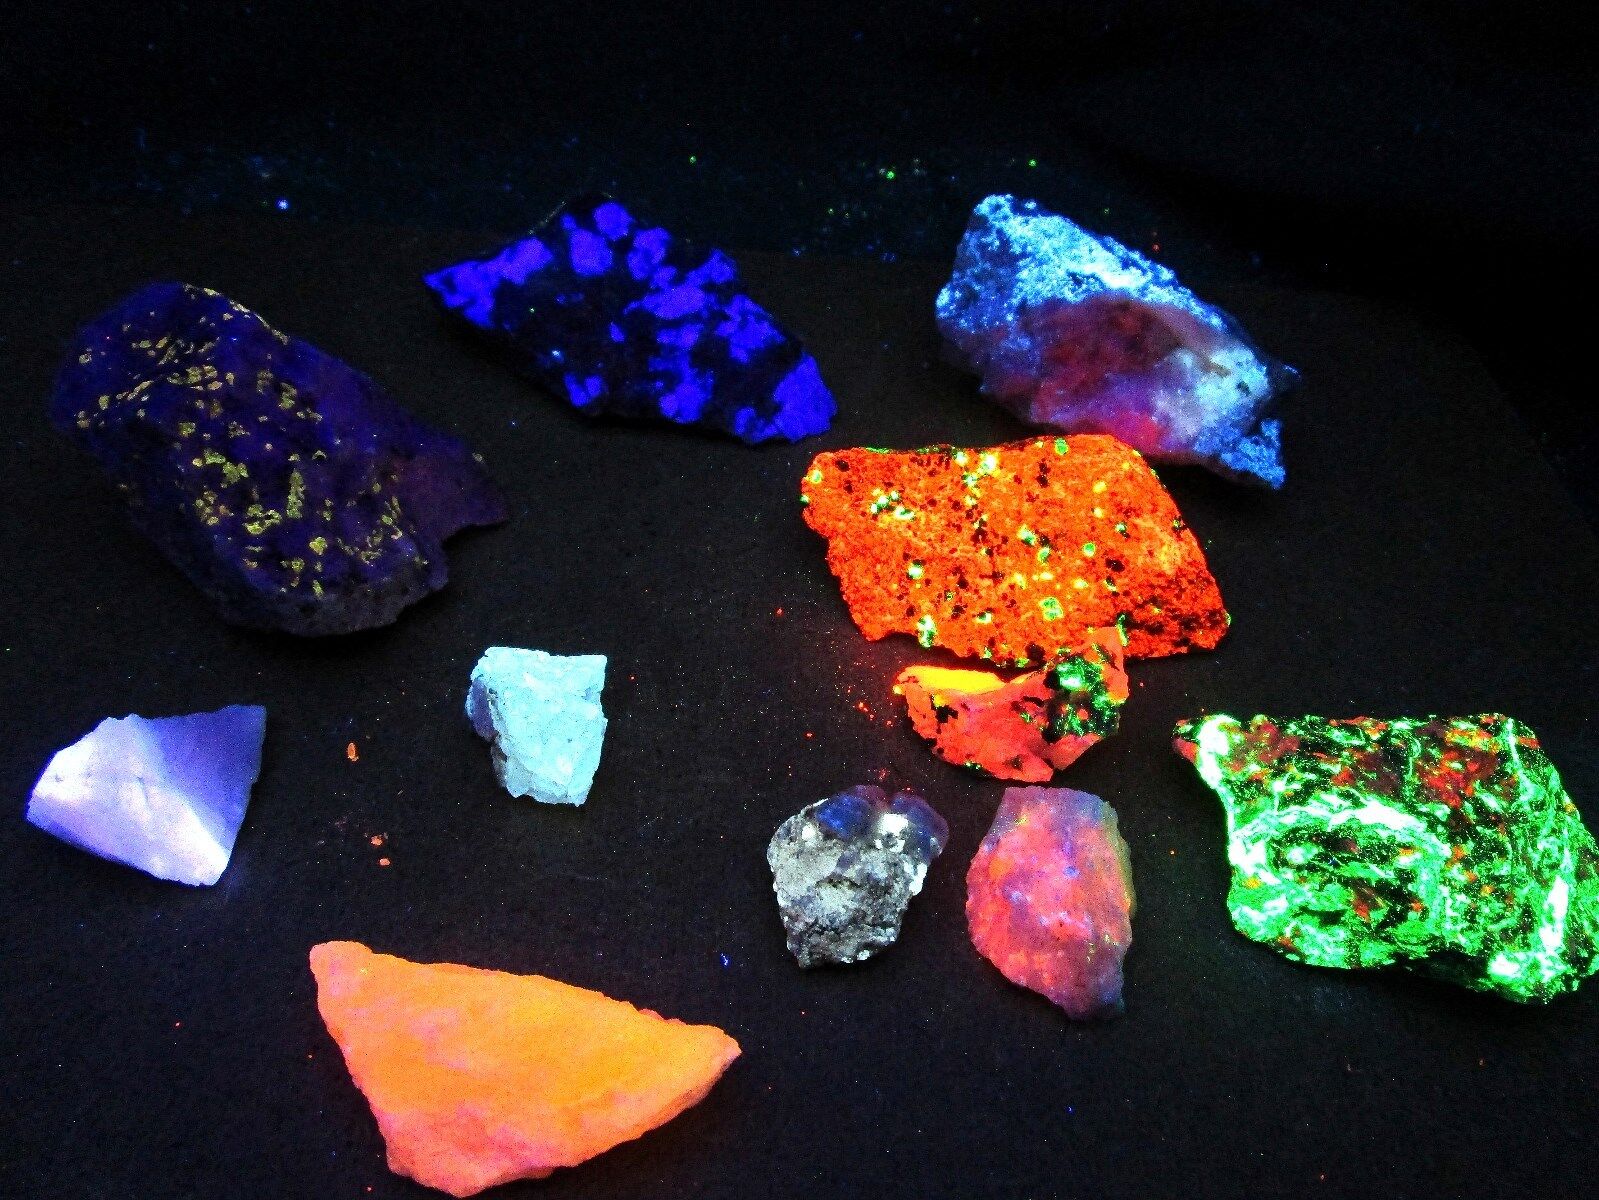 Up to 8 Colors 1 pound Fluorescent mineral rock crystal quality variety box